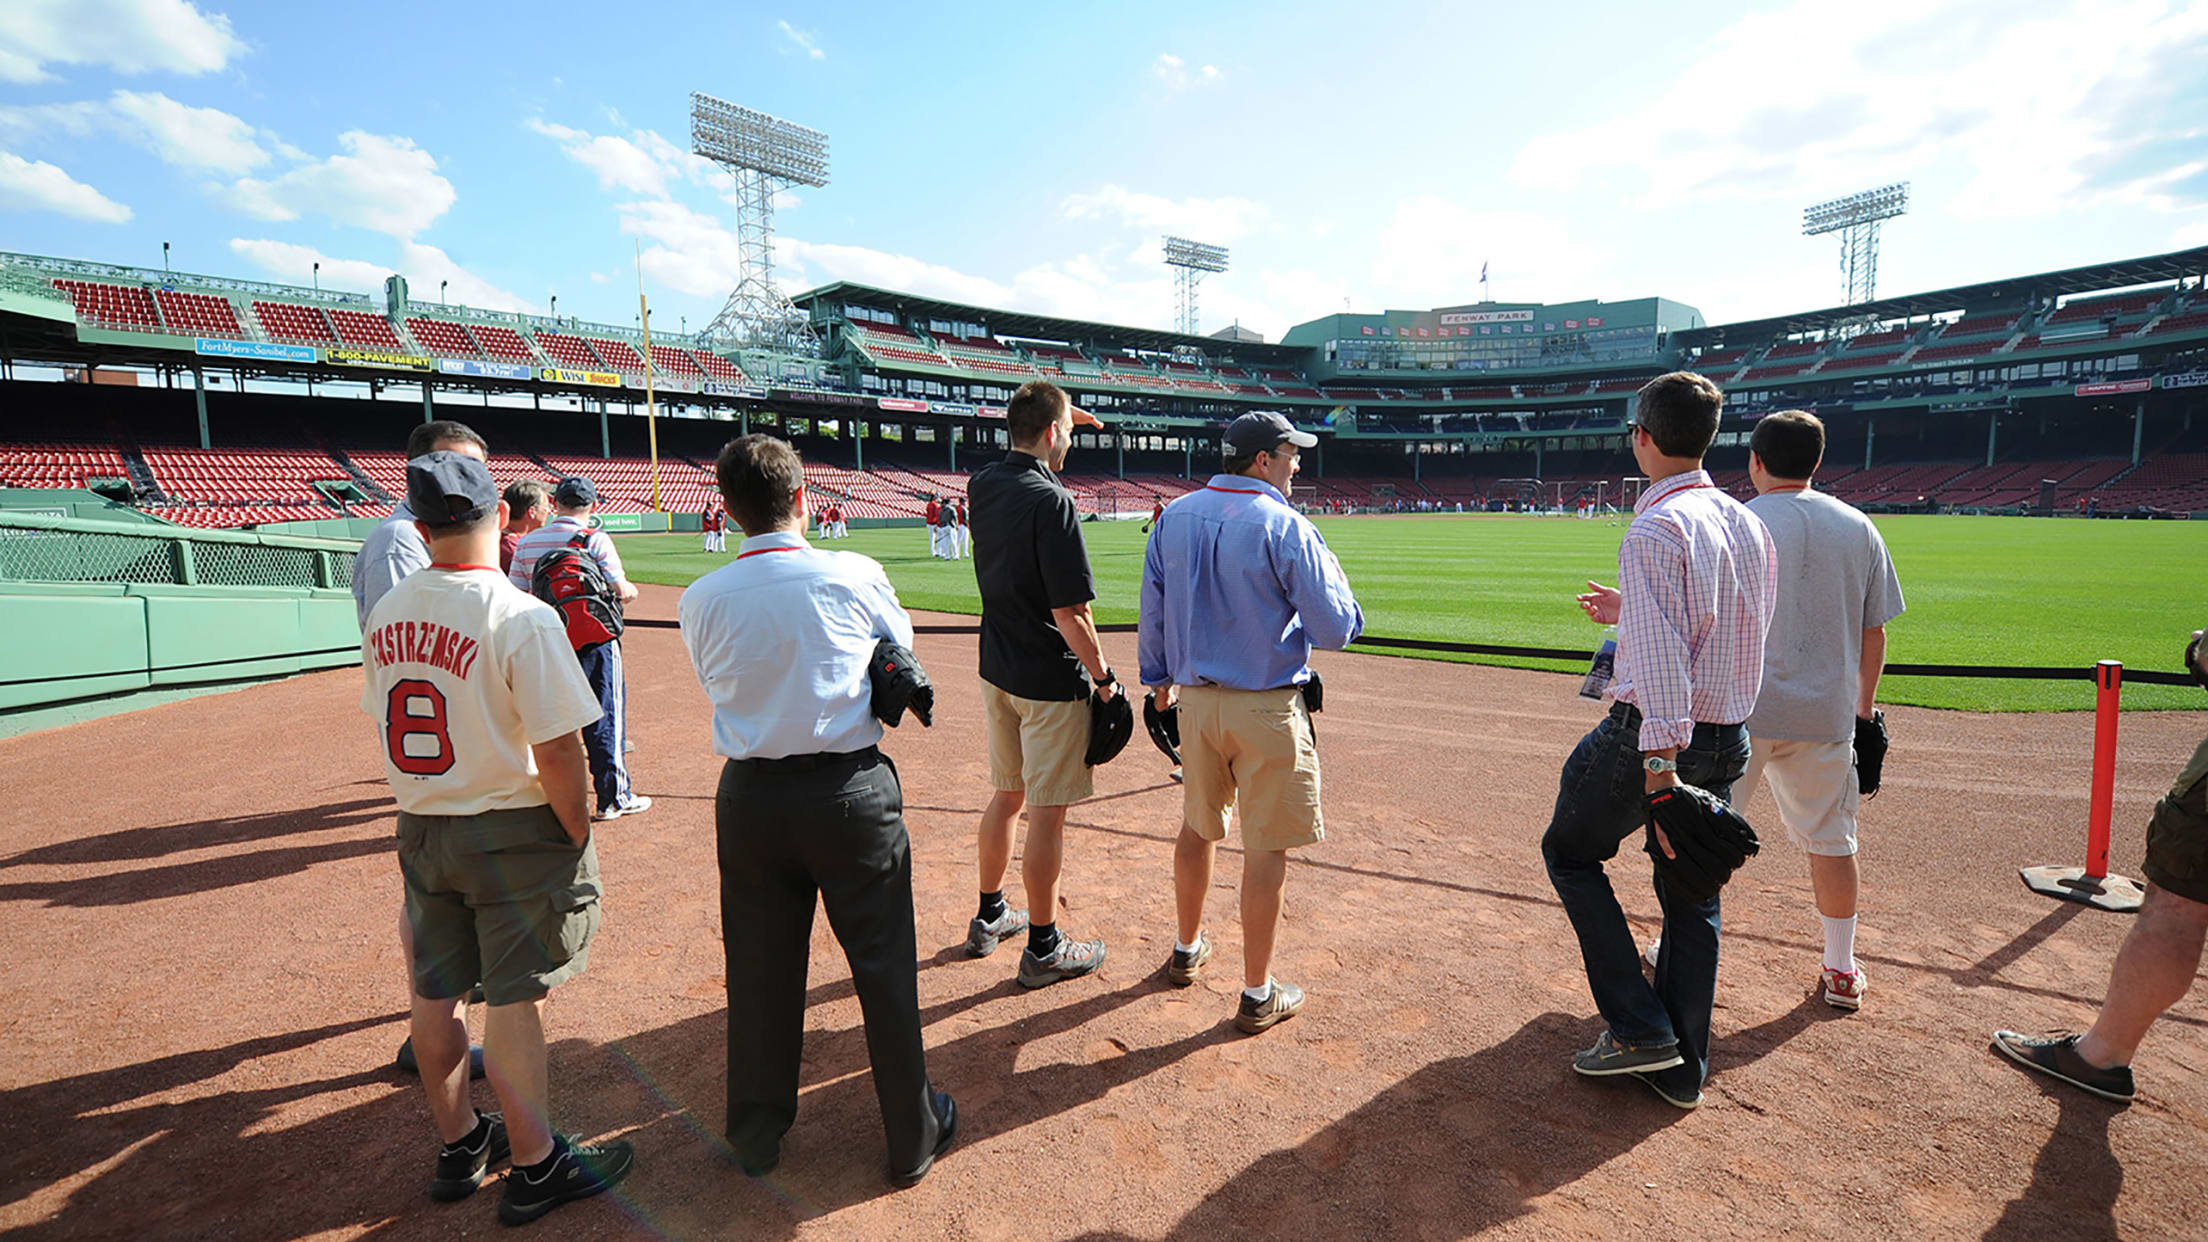 Charitybuzz: 4 Tickets, VIP Tour & Batting Practice Access at a 2023 Boston  Red Sox Home Game